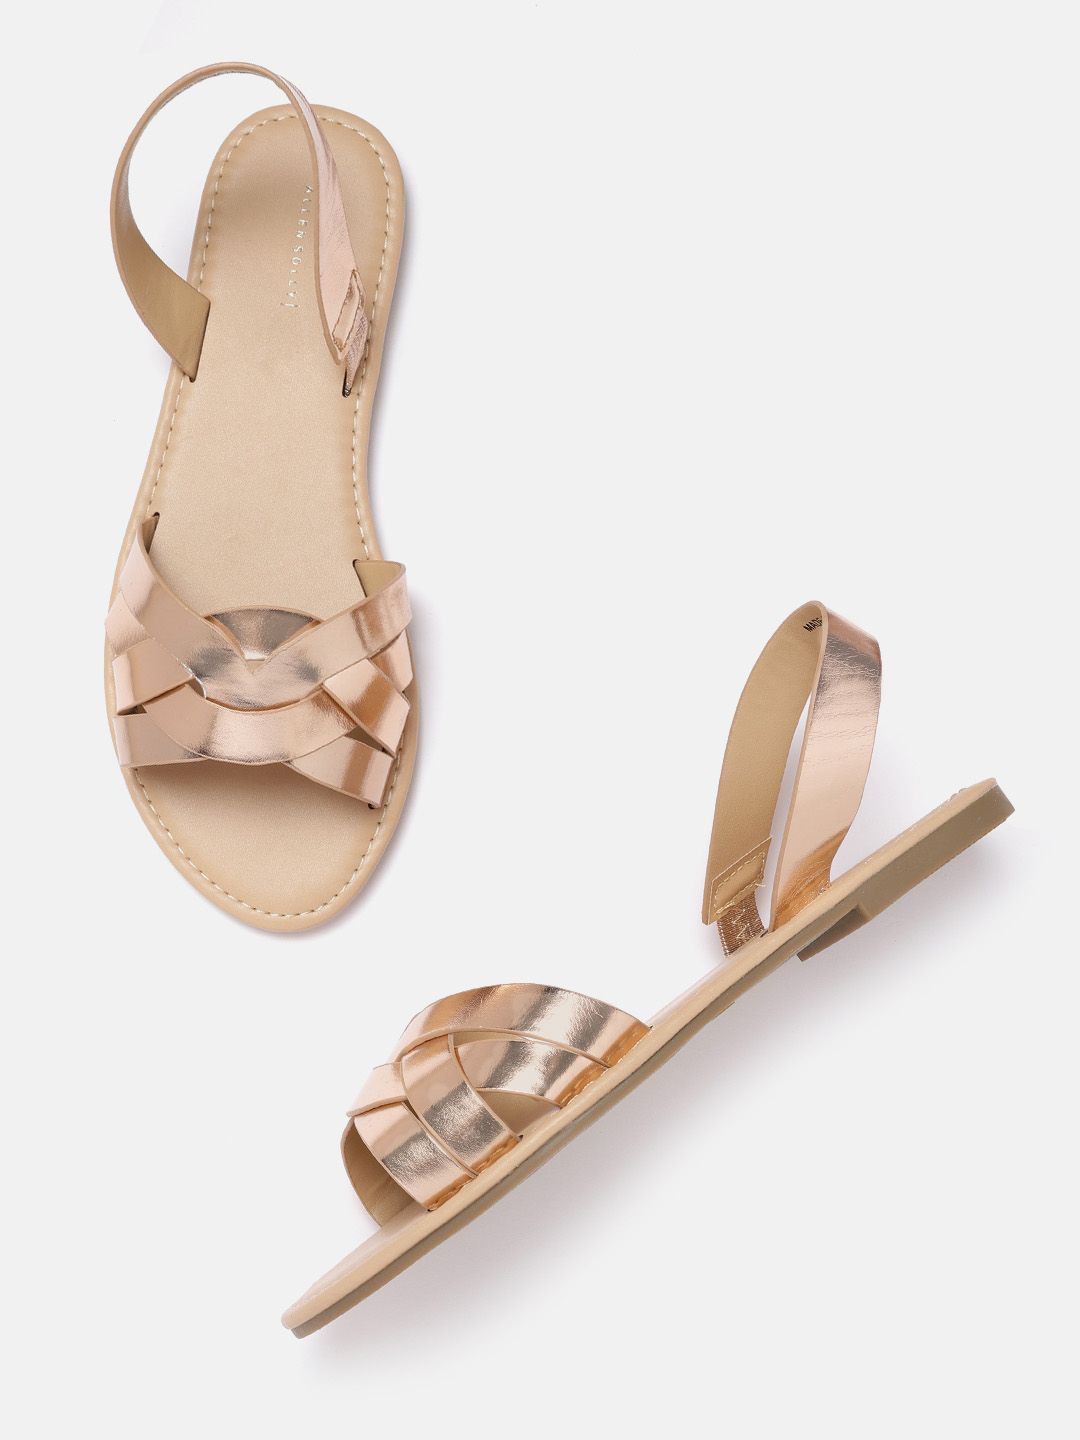 Allen Solly Women Rose Gold-Toned Solid Criss-Cross Open Toe Flats Price in India